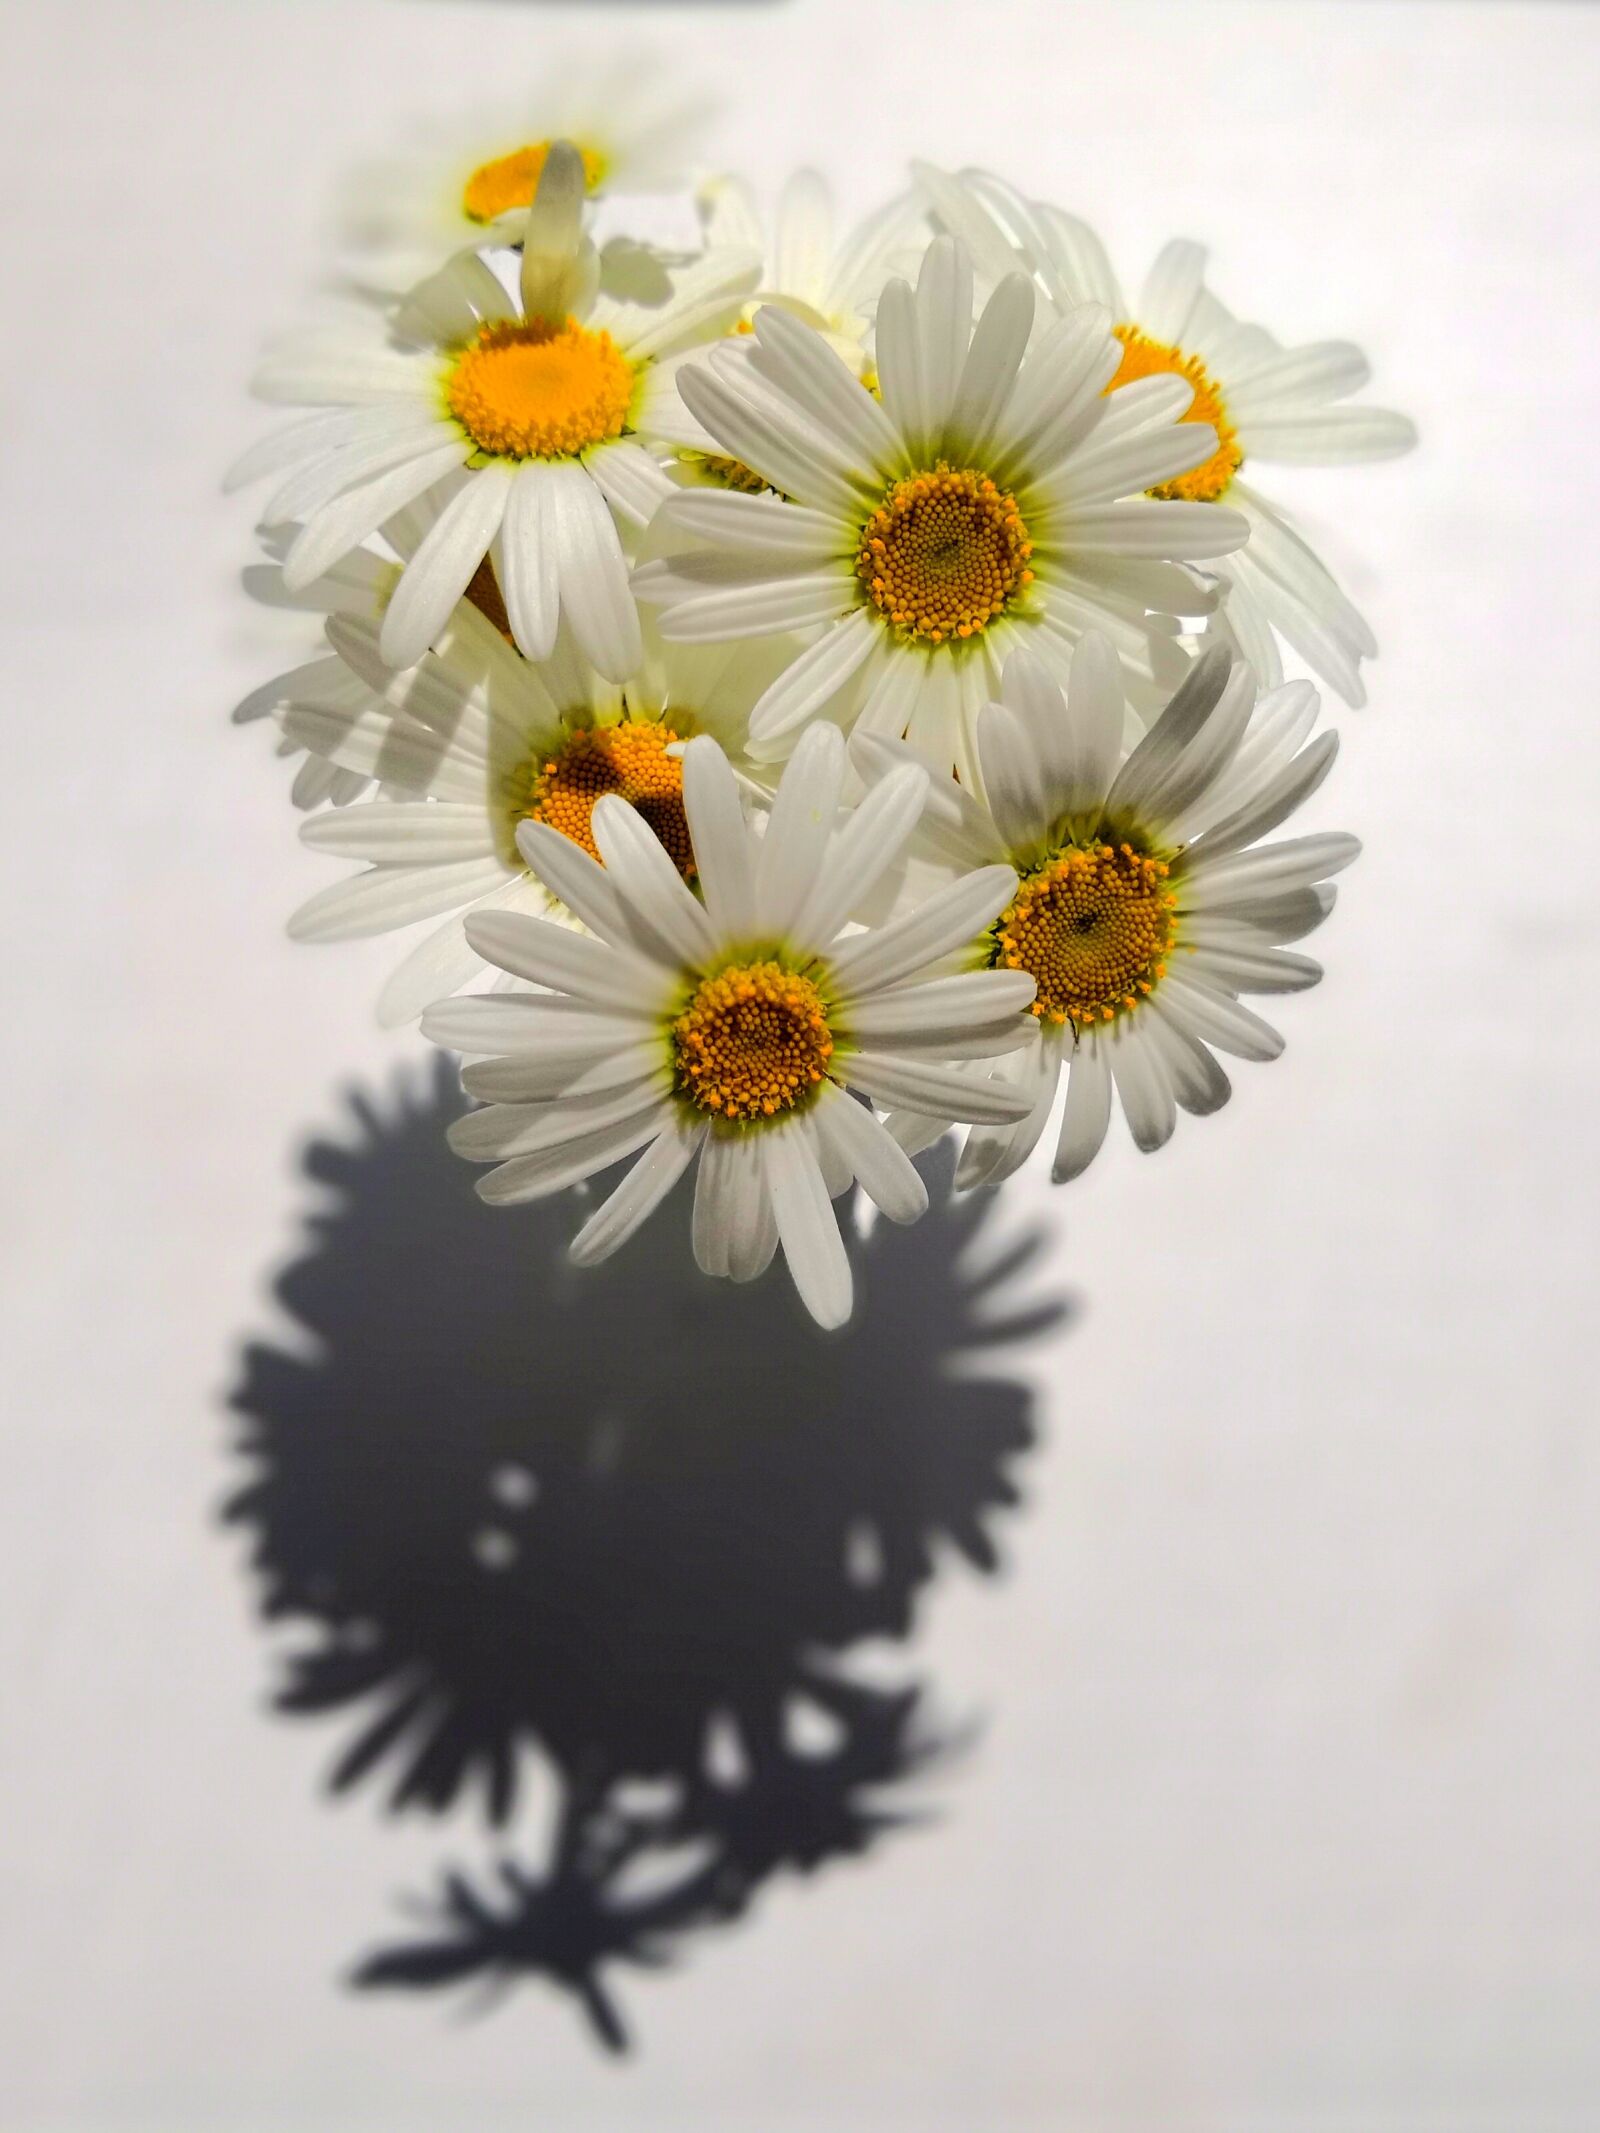 HUAWEI Honor View 10 sample photo. Flower, bouquet, marguerite photography